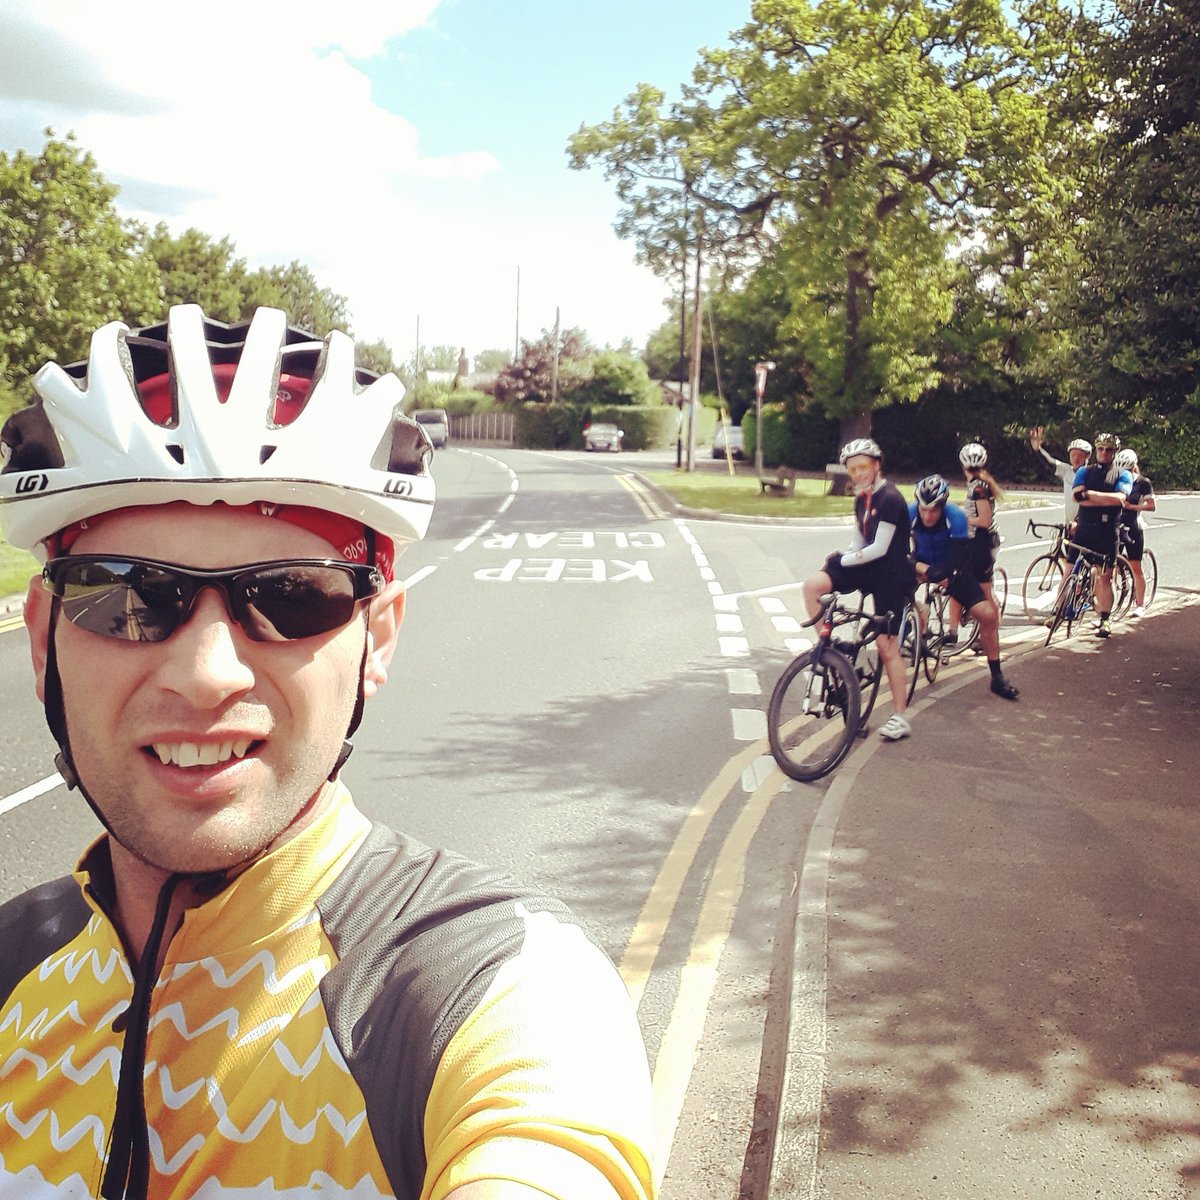 Out with the guys from @StockportTri. Thank you for letting me join the group bikeride. #training #cycling #lejog #ultralejog #bikeride #7daysofcycling #friday #triathlon #youngminds #TeamYM #fightingfor #togethertrust #giveitback #timetocare #together #trust #stockporttriathlon